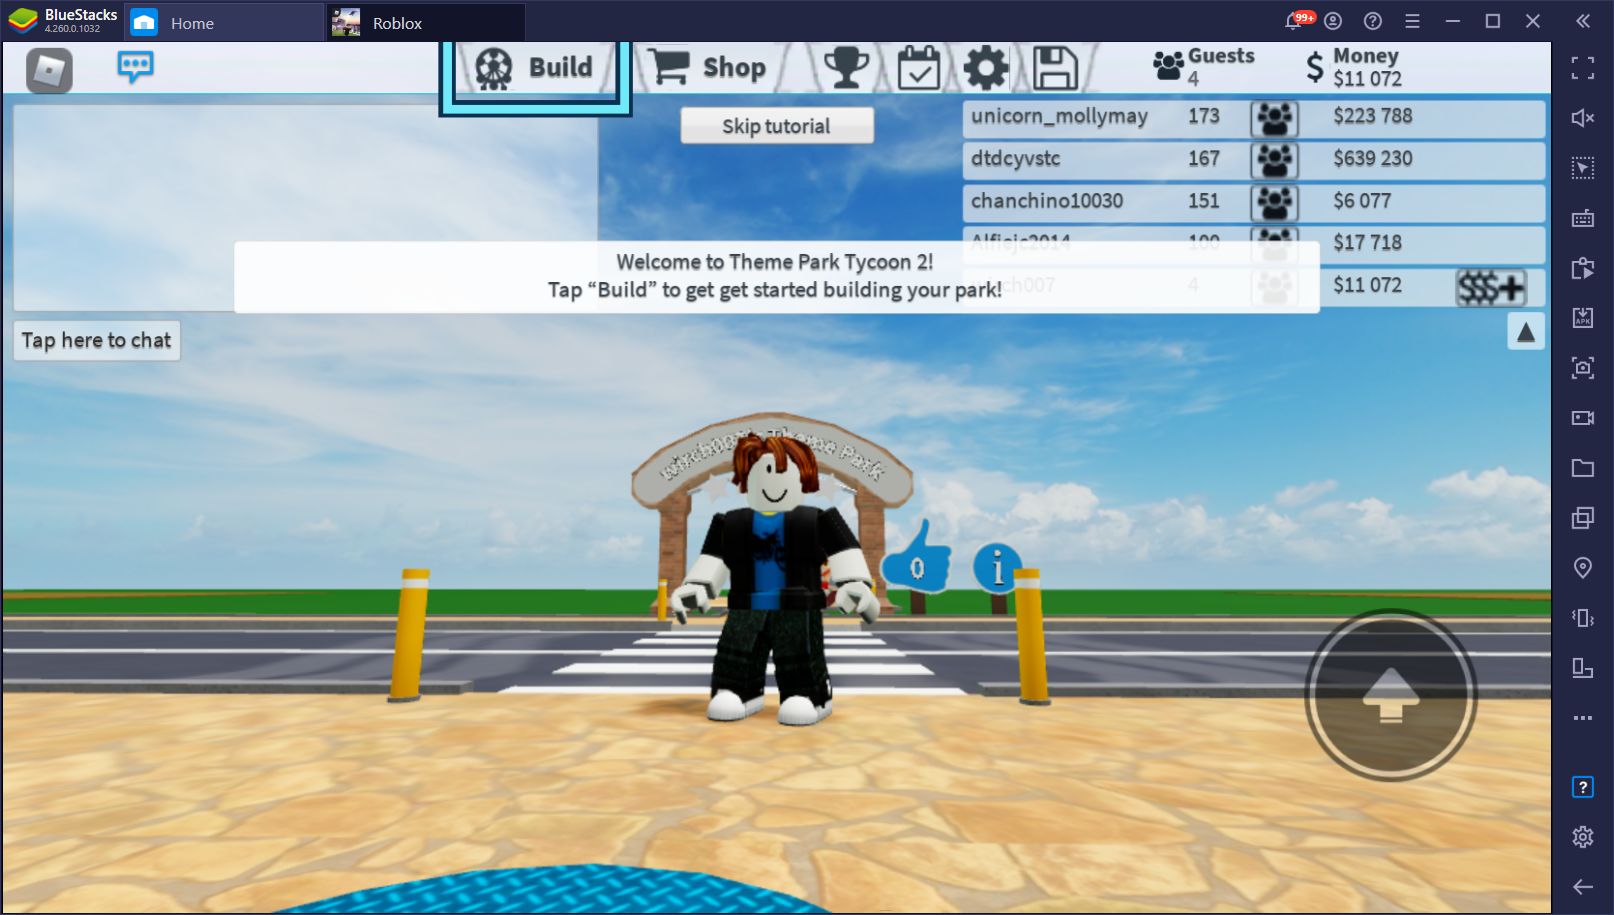 The Best Roblox Games To Play In 2021 Bluestacks - roblox how to make a good city game